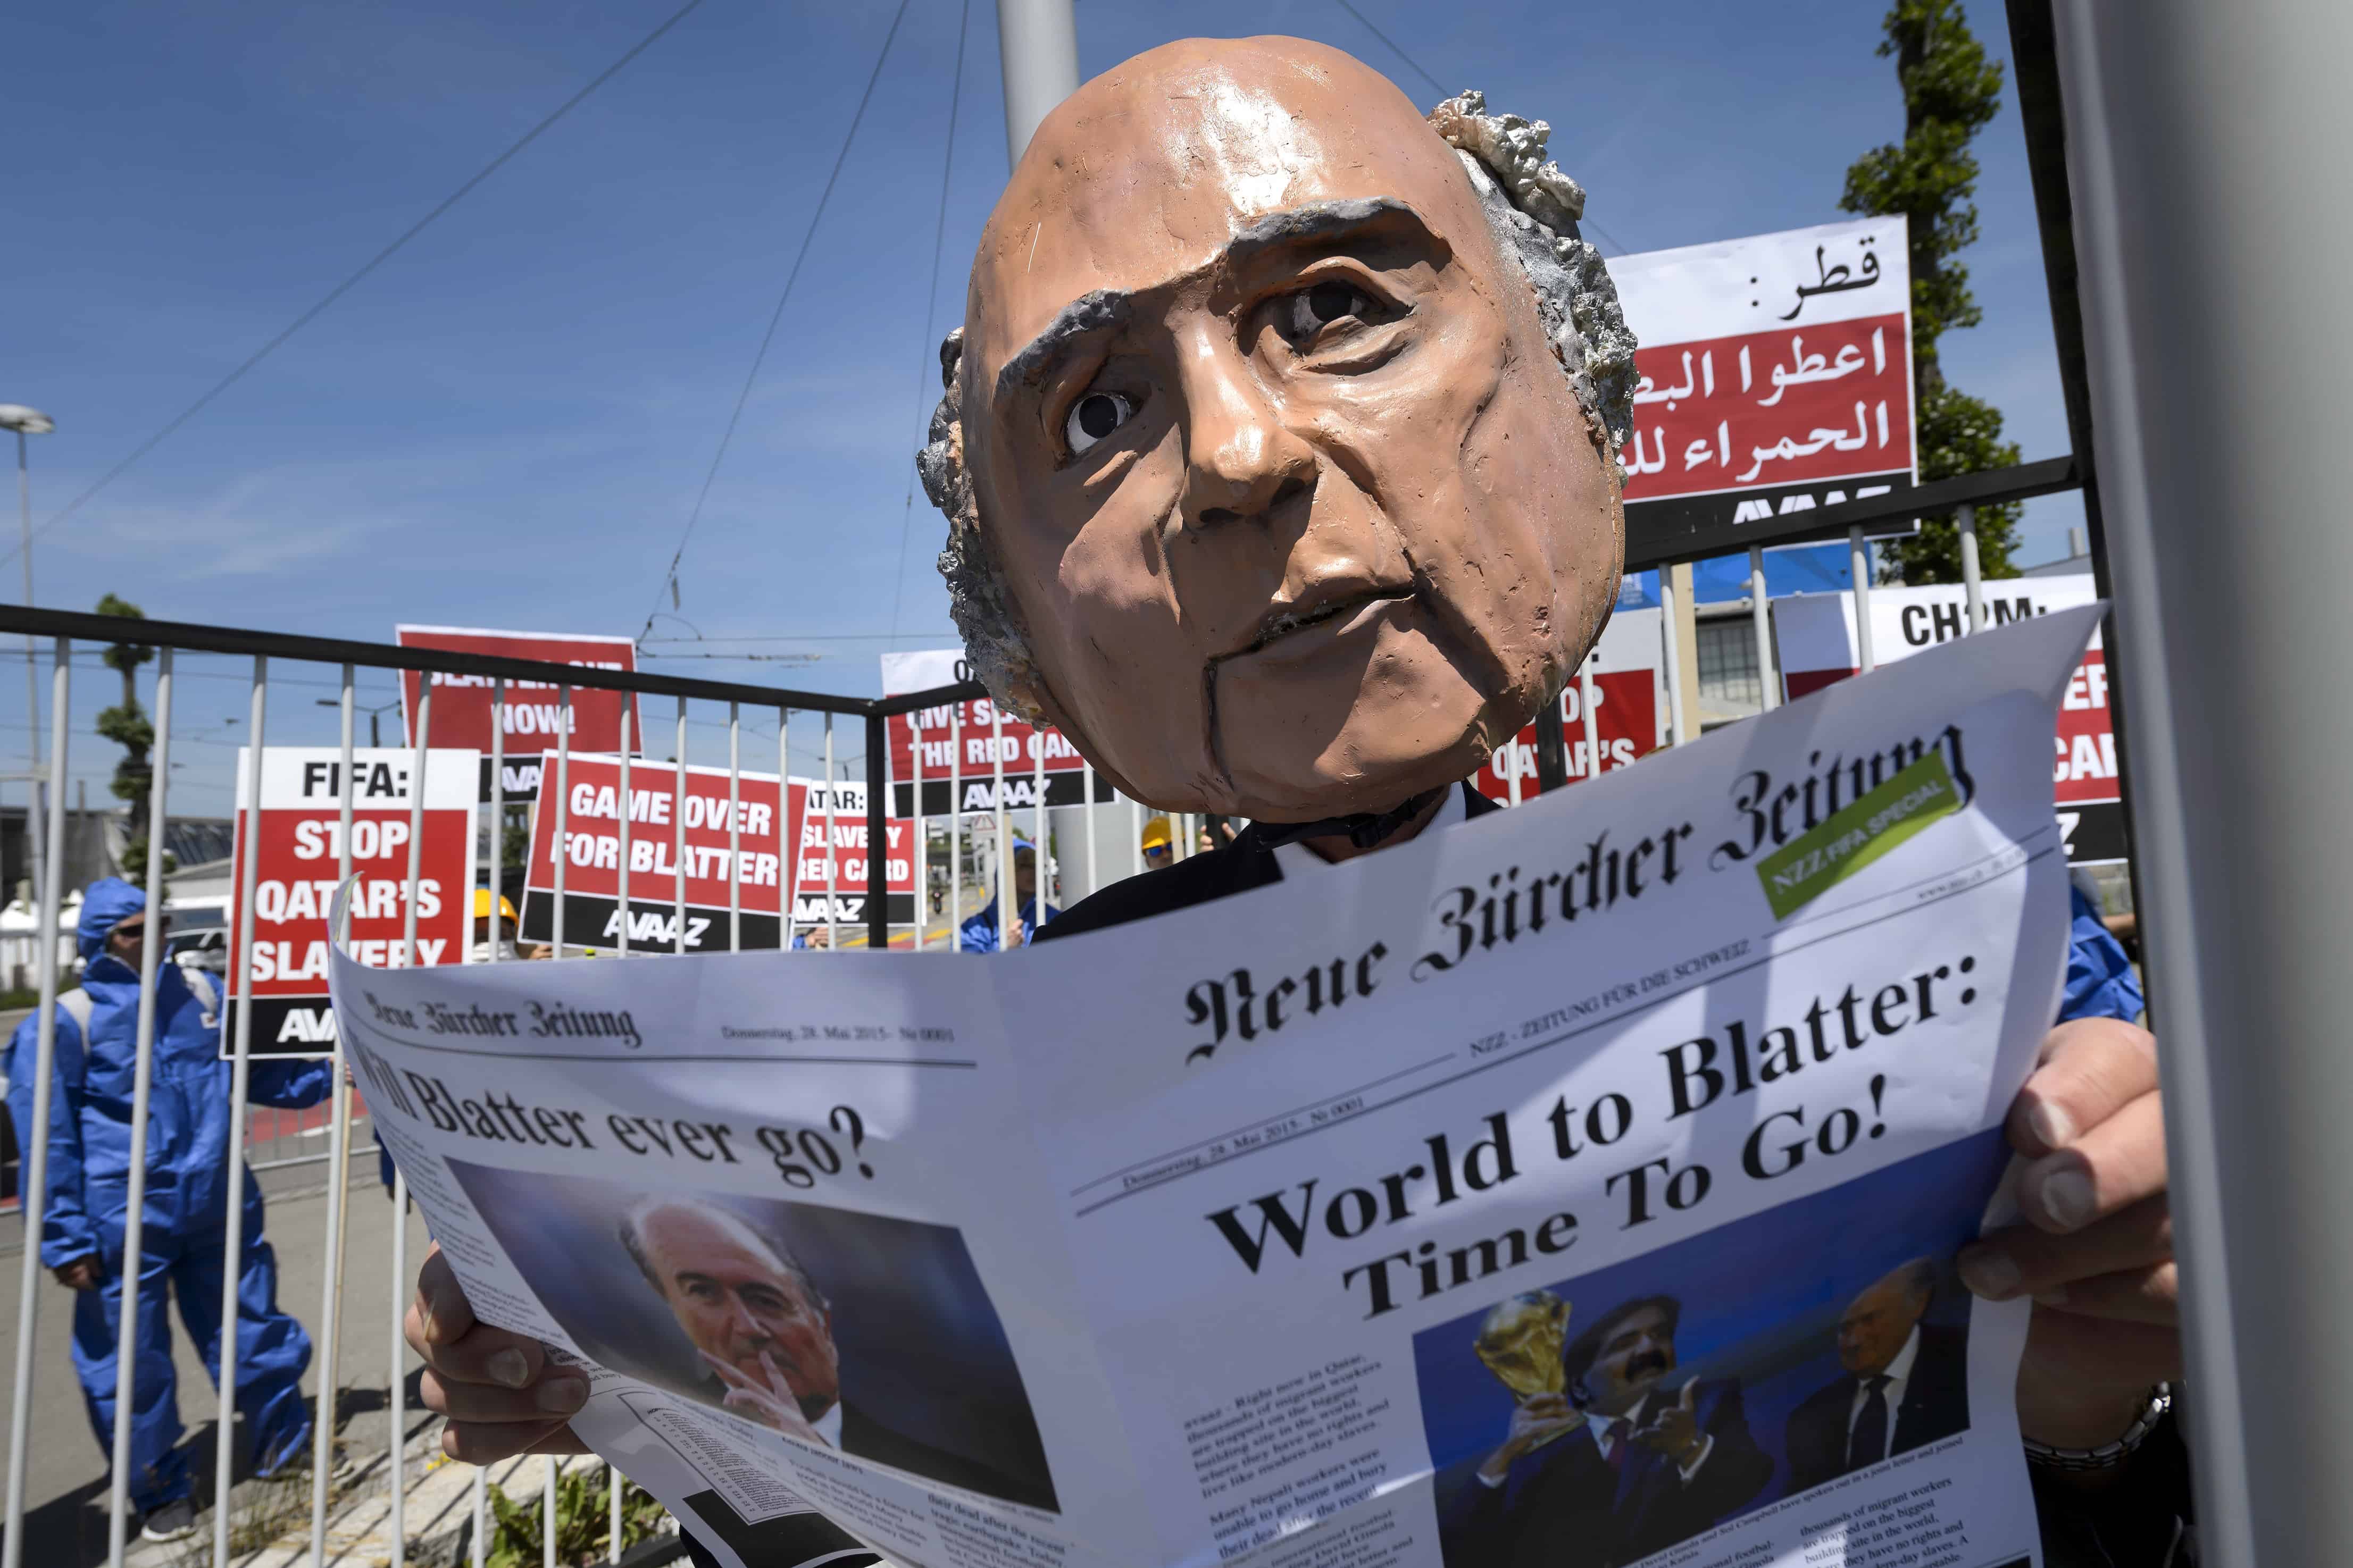 A demonstrator disguised as FIFA President Sepp Blatter takes part in a protest against the condition of workers in Qatar.